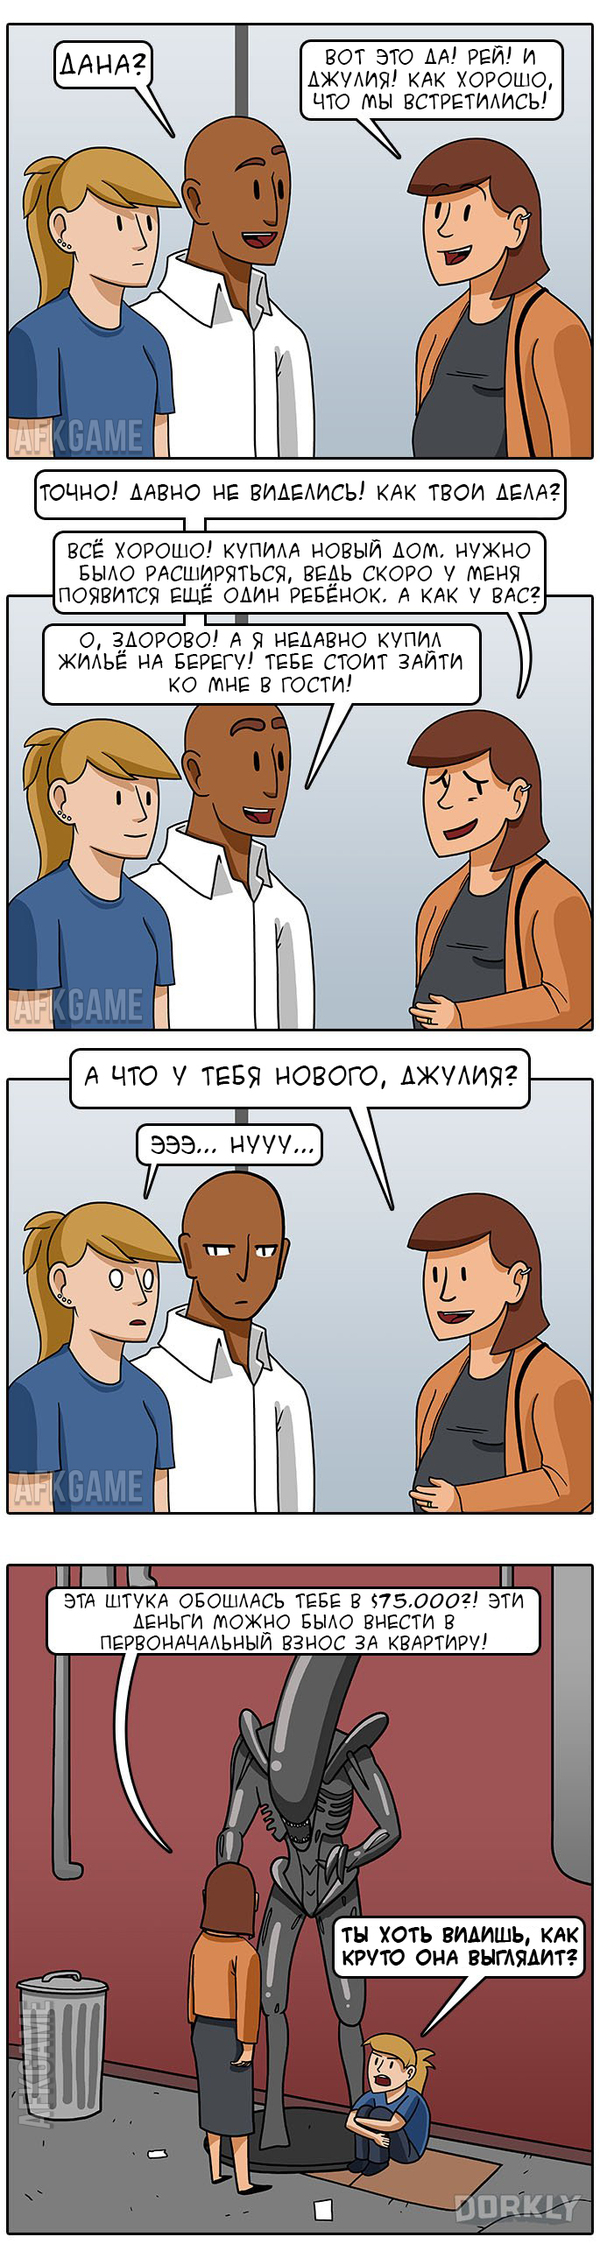 Why nerds can't be trusted with money - Comics, Dorkly, Translation, Longpost, Nerd, Stranger